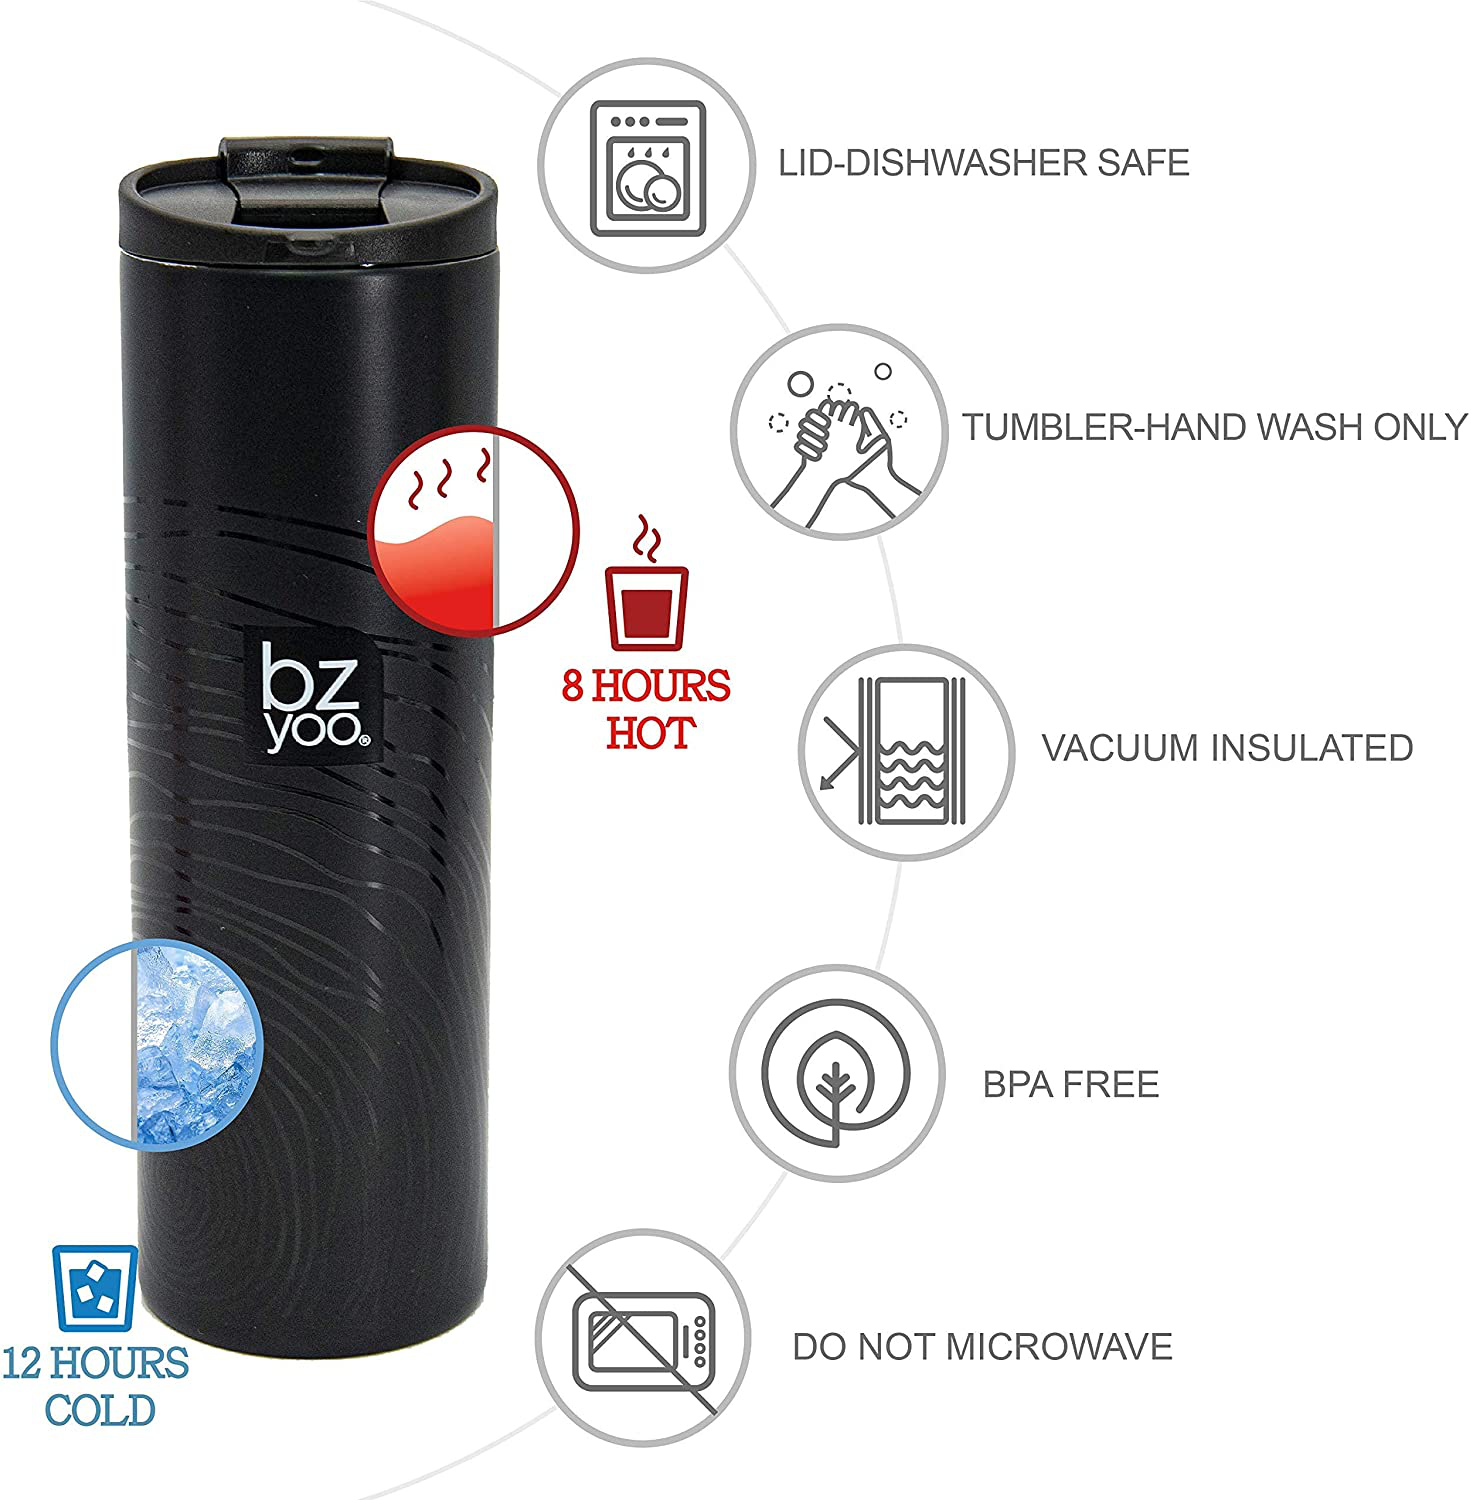 bzyoo Brew 18/8 Stainless Vacuum Drinking BPA-Free 16oz Coffee Mug Water Thermal Bottle with Leak Proof Design for Hike Camping Holiday New Year Gifts Wellness (Organica, Black)